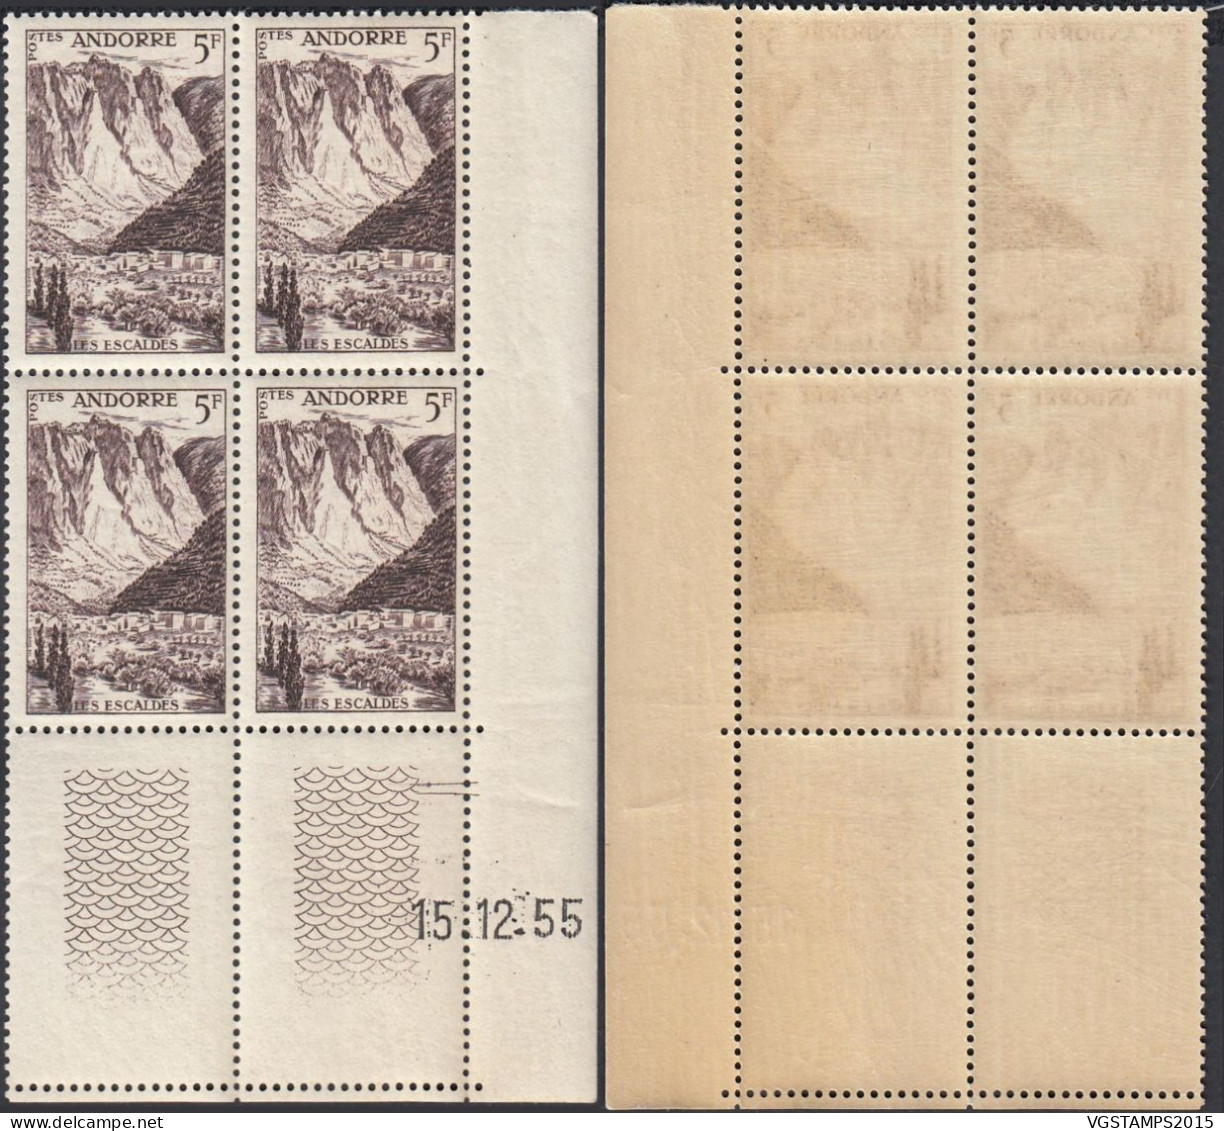 Andorre 1955 - Andorre Française - Timbres Neufs. Yvert Nr.: 141. Michel Nr.: 145. Coin Daté: 15/12/55... (EB) DC-12548 - Unused Stamps